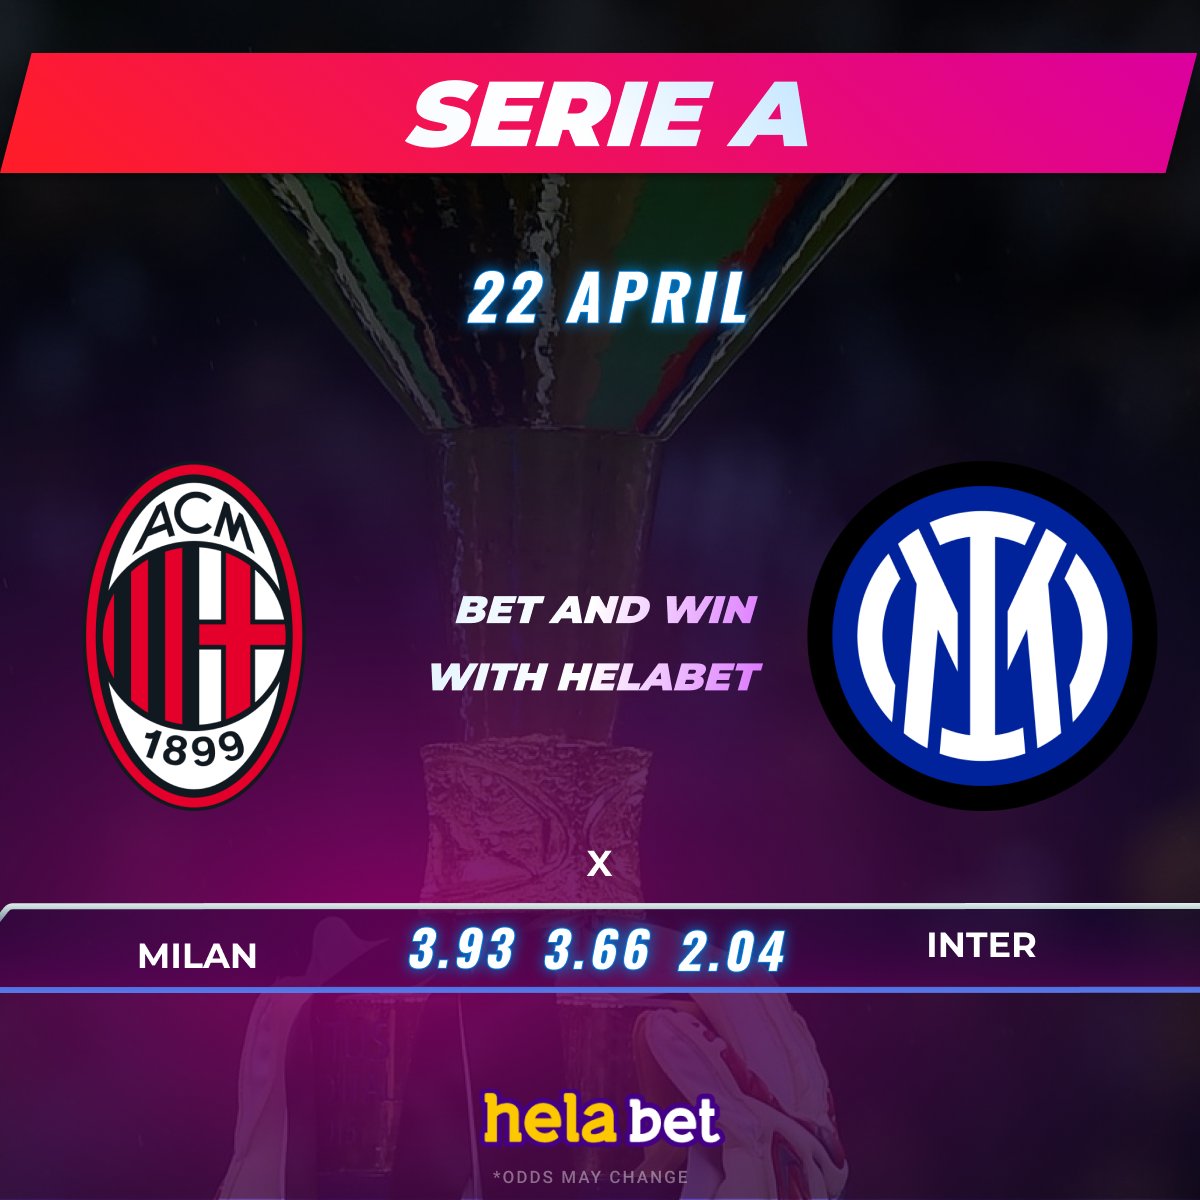 🇮🇹 Serie A 🇮🇹 ⚽ Milan VS Inter 👉 Milan are unbeaten in 8 of their last 10 matches at home ❓Who will be the winner of the match? 👍Place a bet in #Helabet 👉 cutt.ly/UwY8h1uG #seriea #football #betting